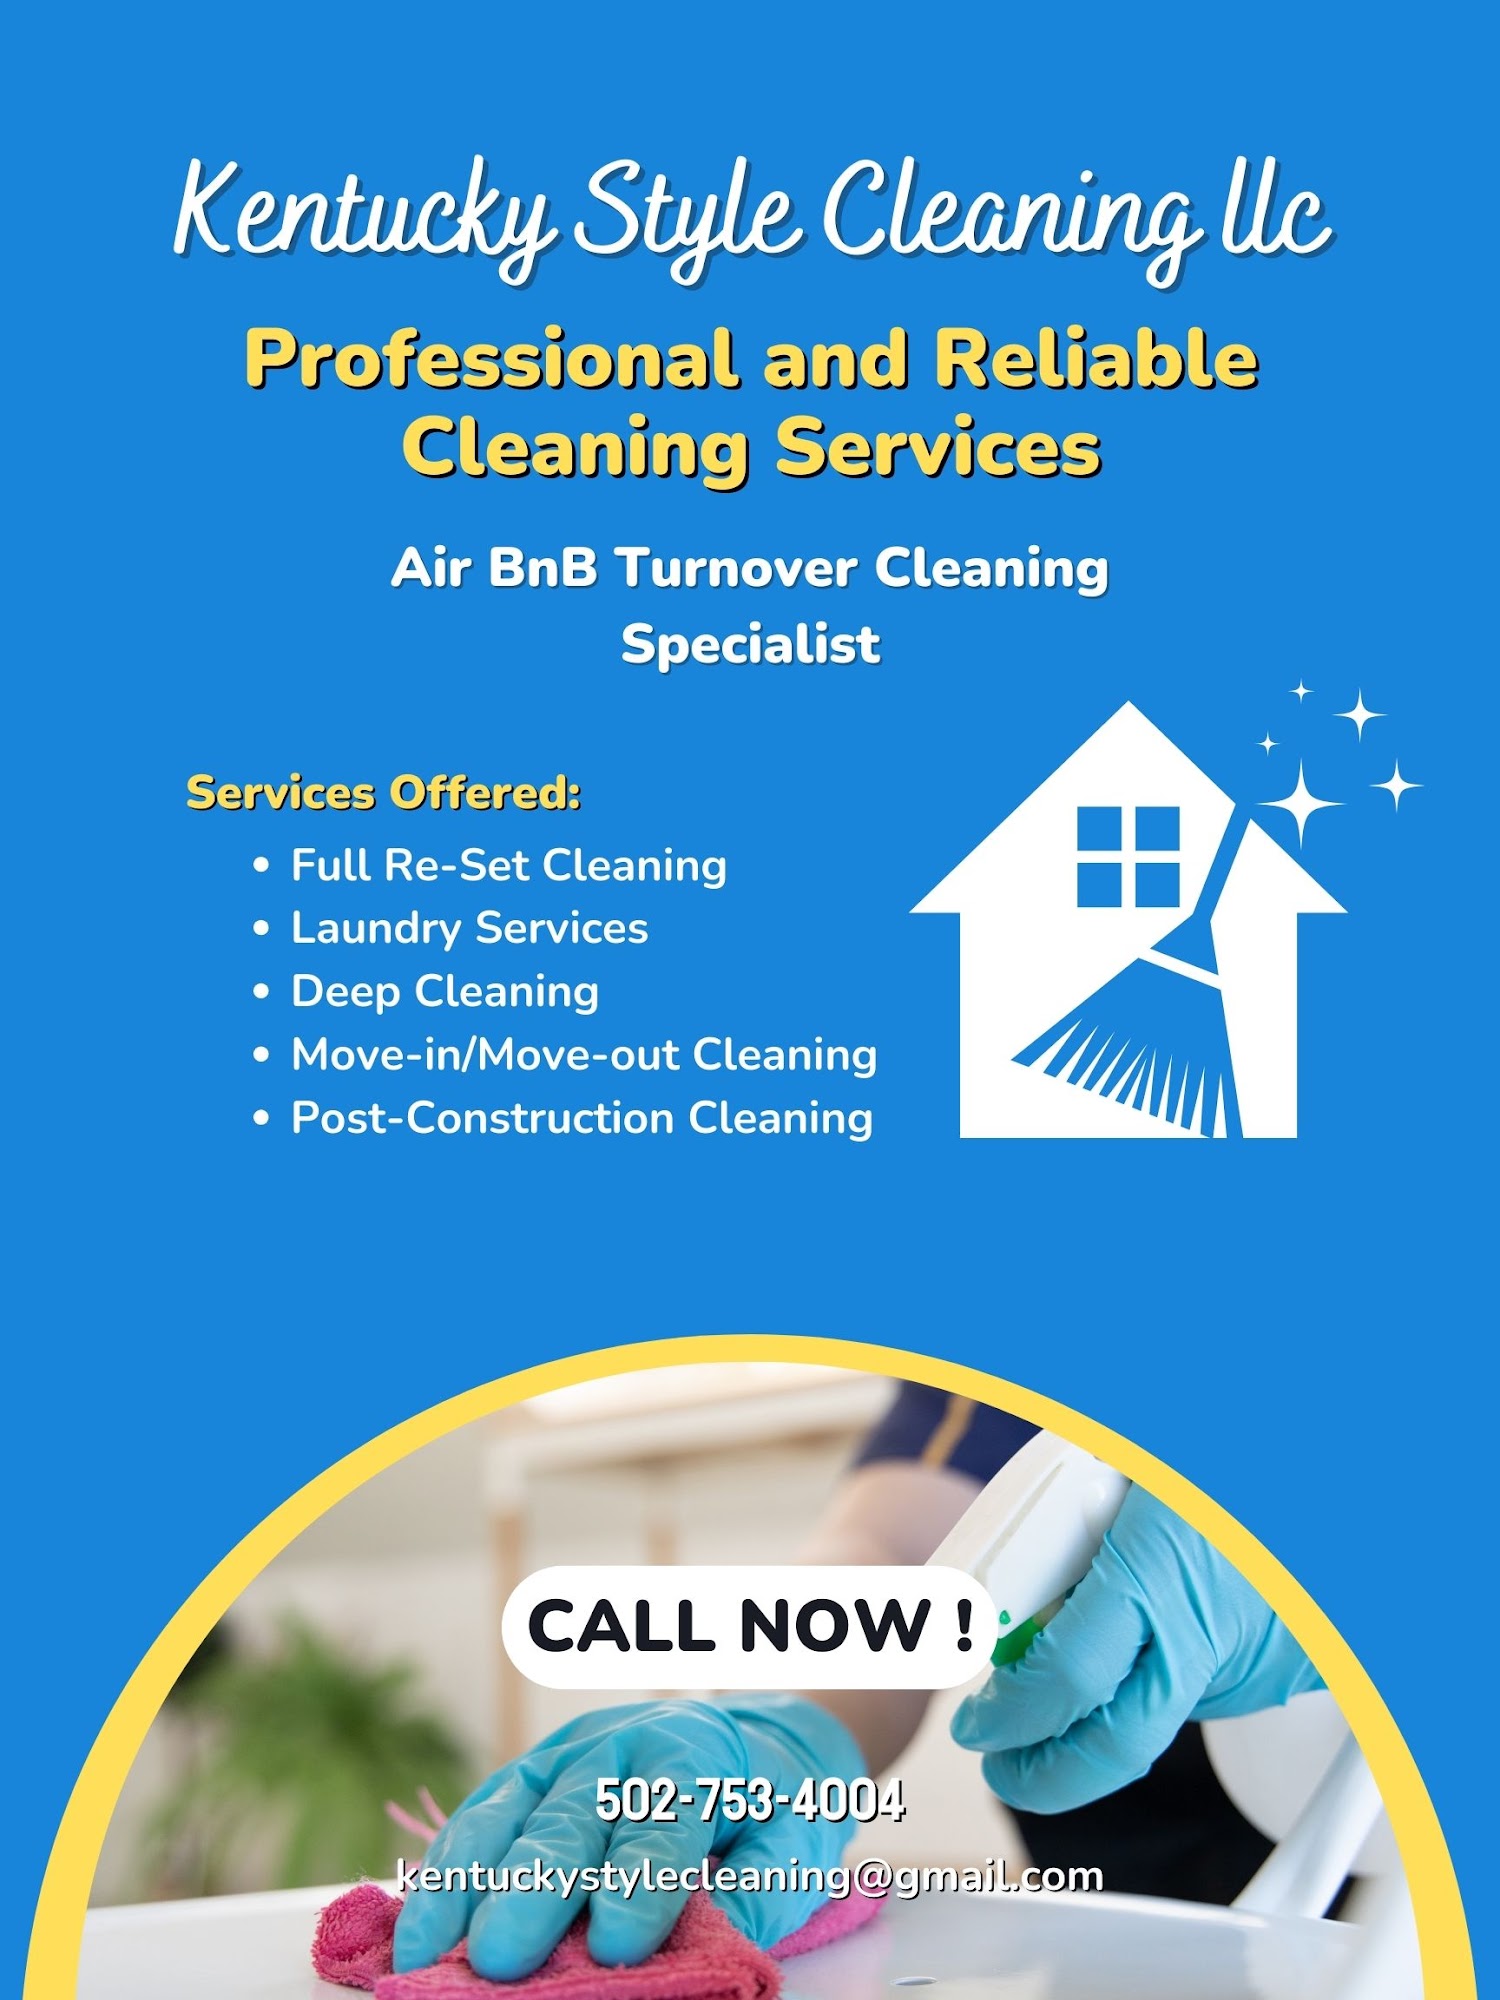 Kentucky Style Cleaning LLC